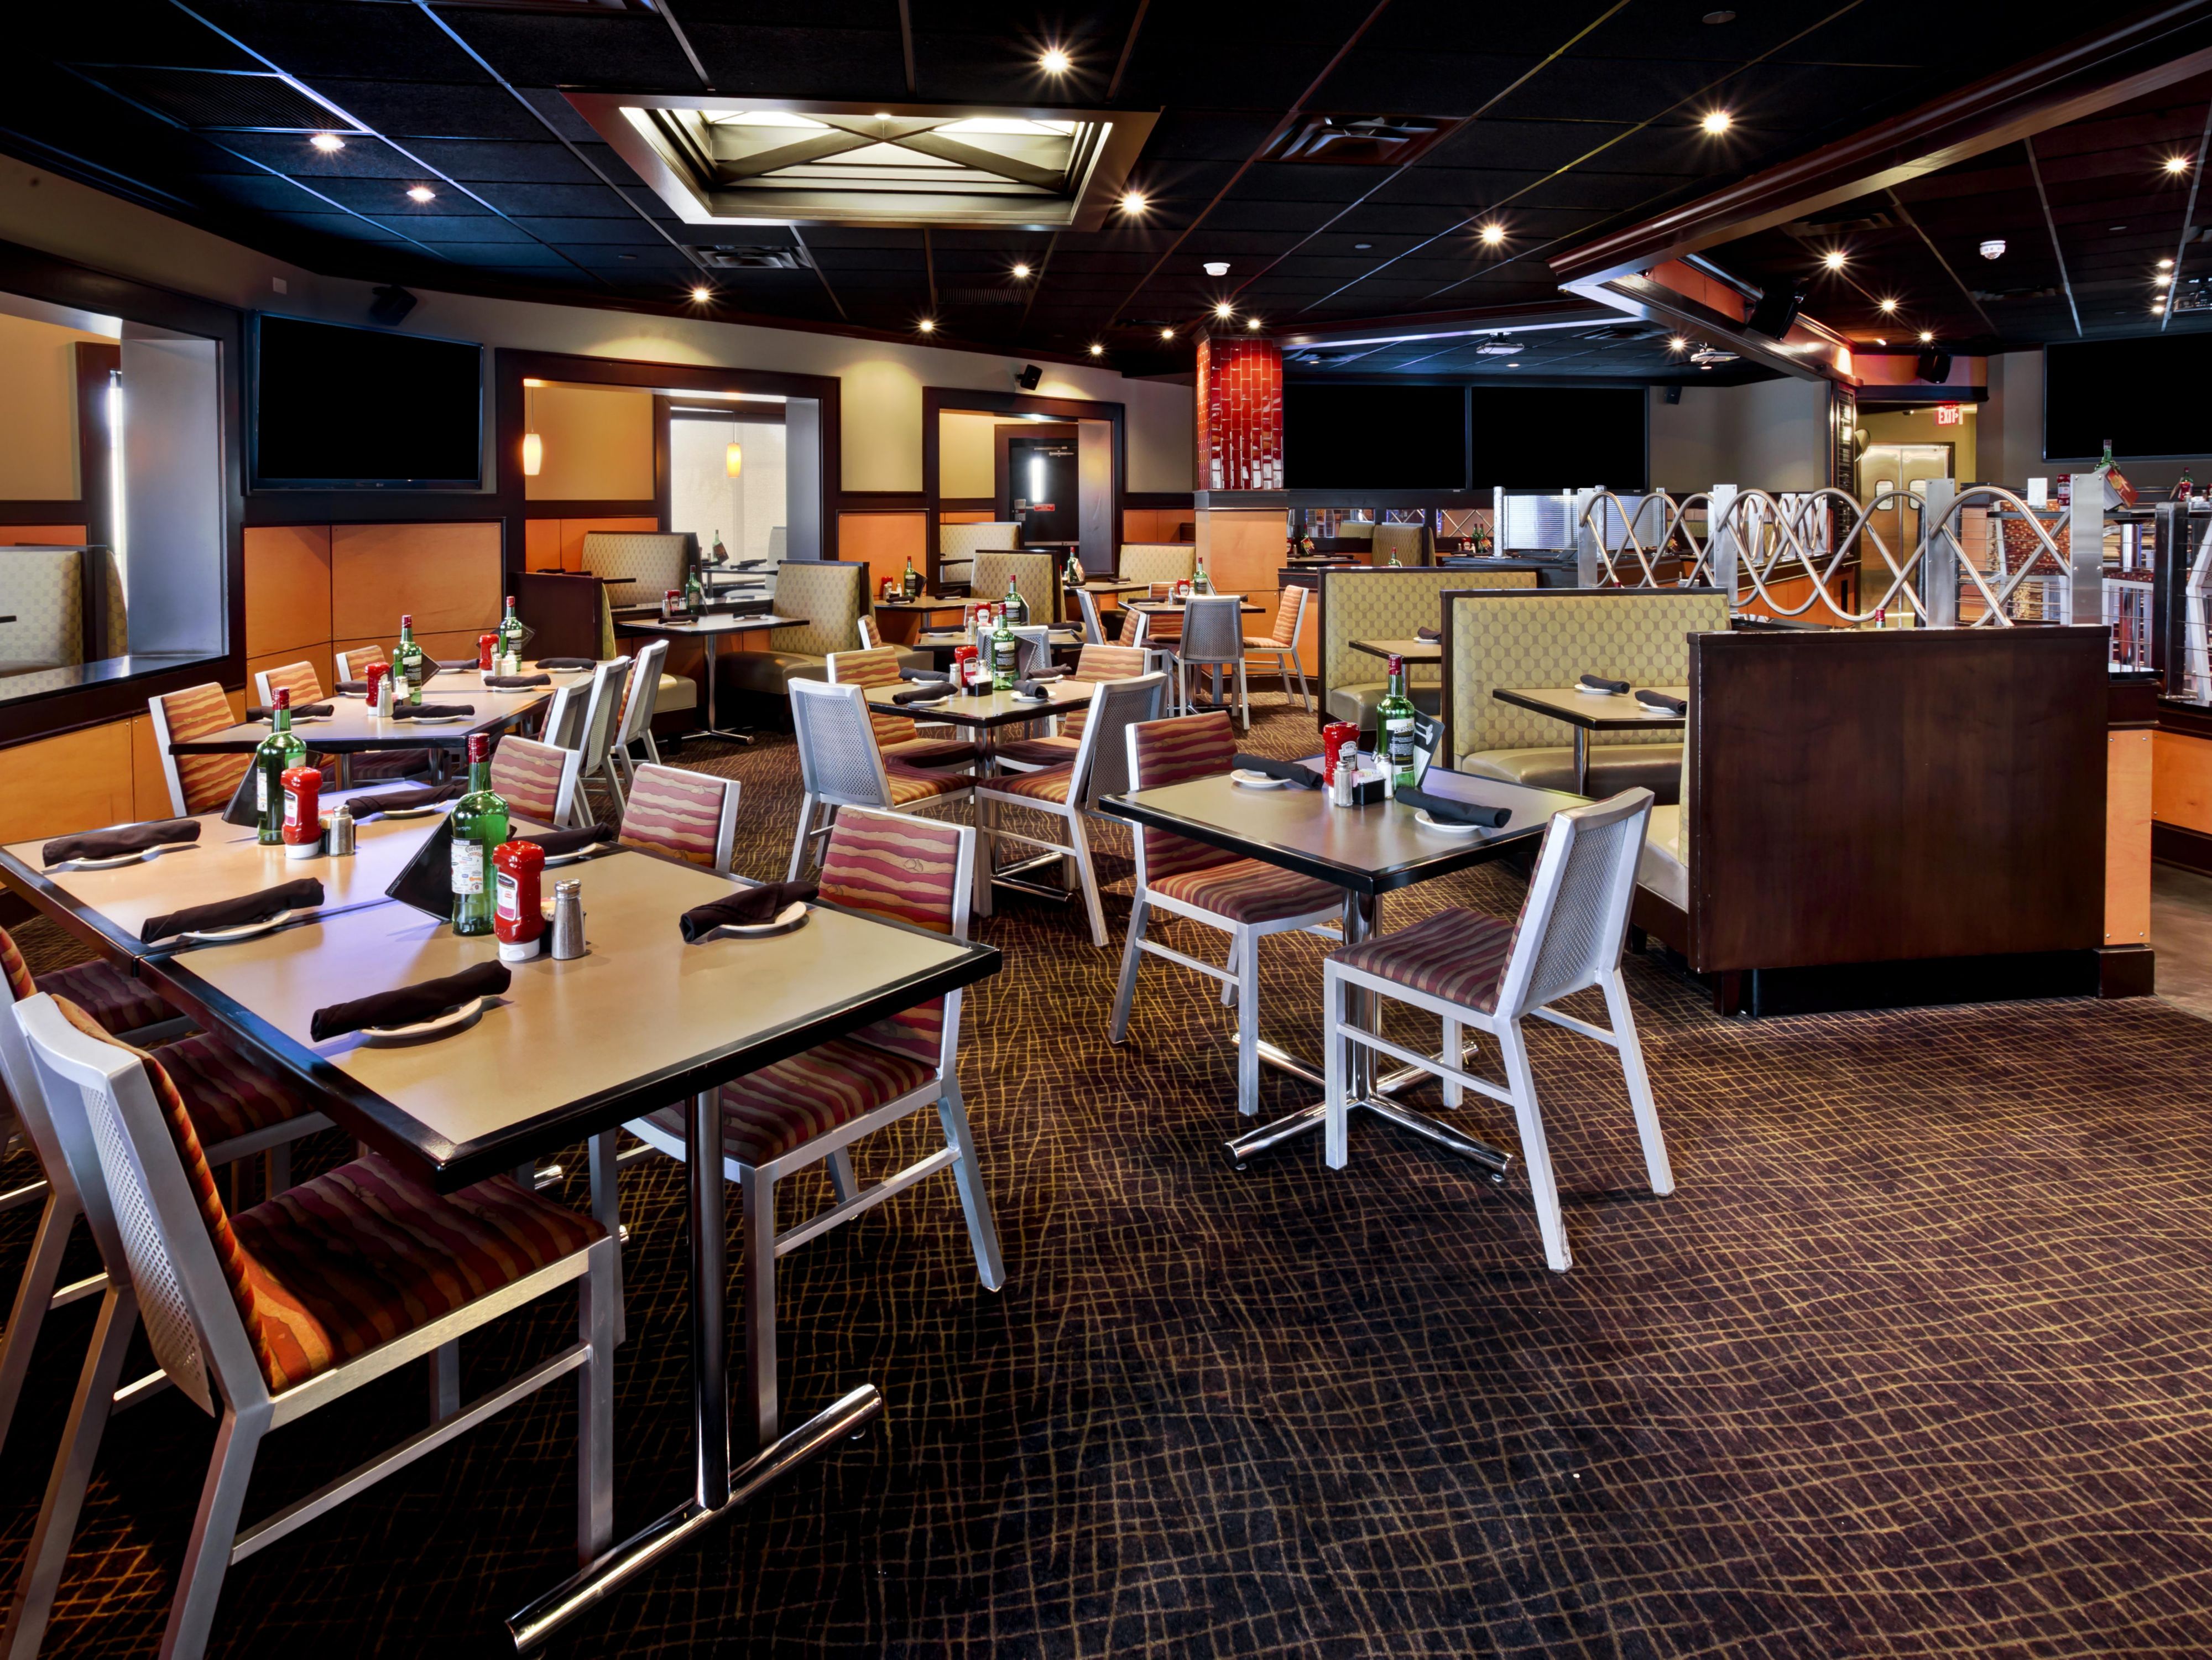 Hungry? Come visit and see our complete remodel! We've included a VIP lounge, 27 TVs, 4 Hi-Def 90" projection TVs, a brand new music system and a fantastic, inviting bar! Don't miss out on these legendary changes. Stop by and see what all the buzz is about!